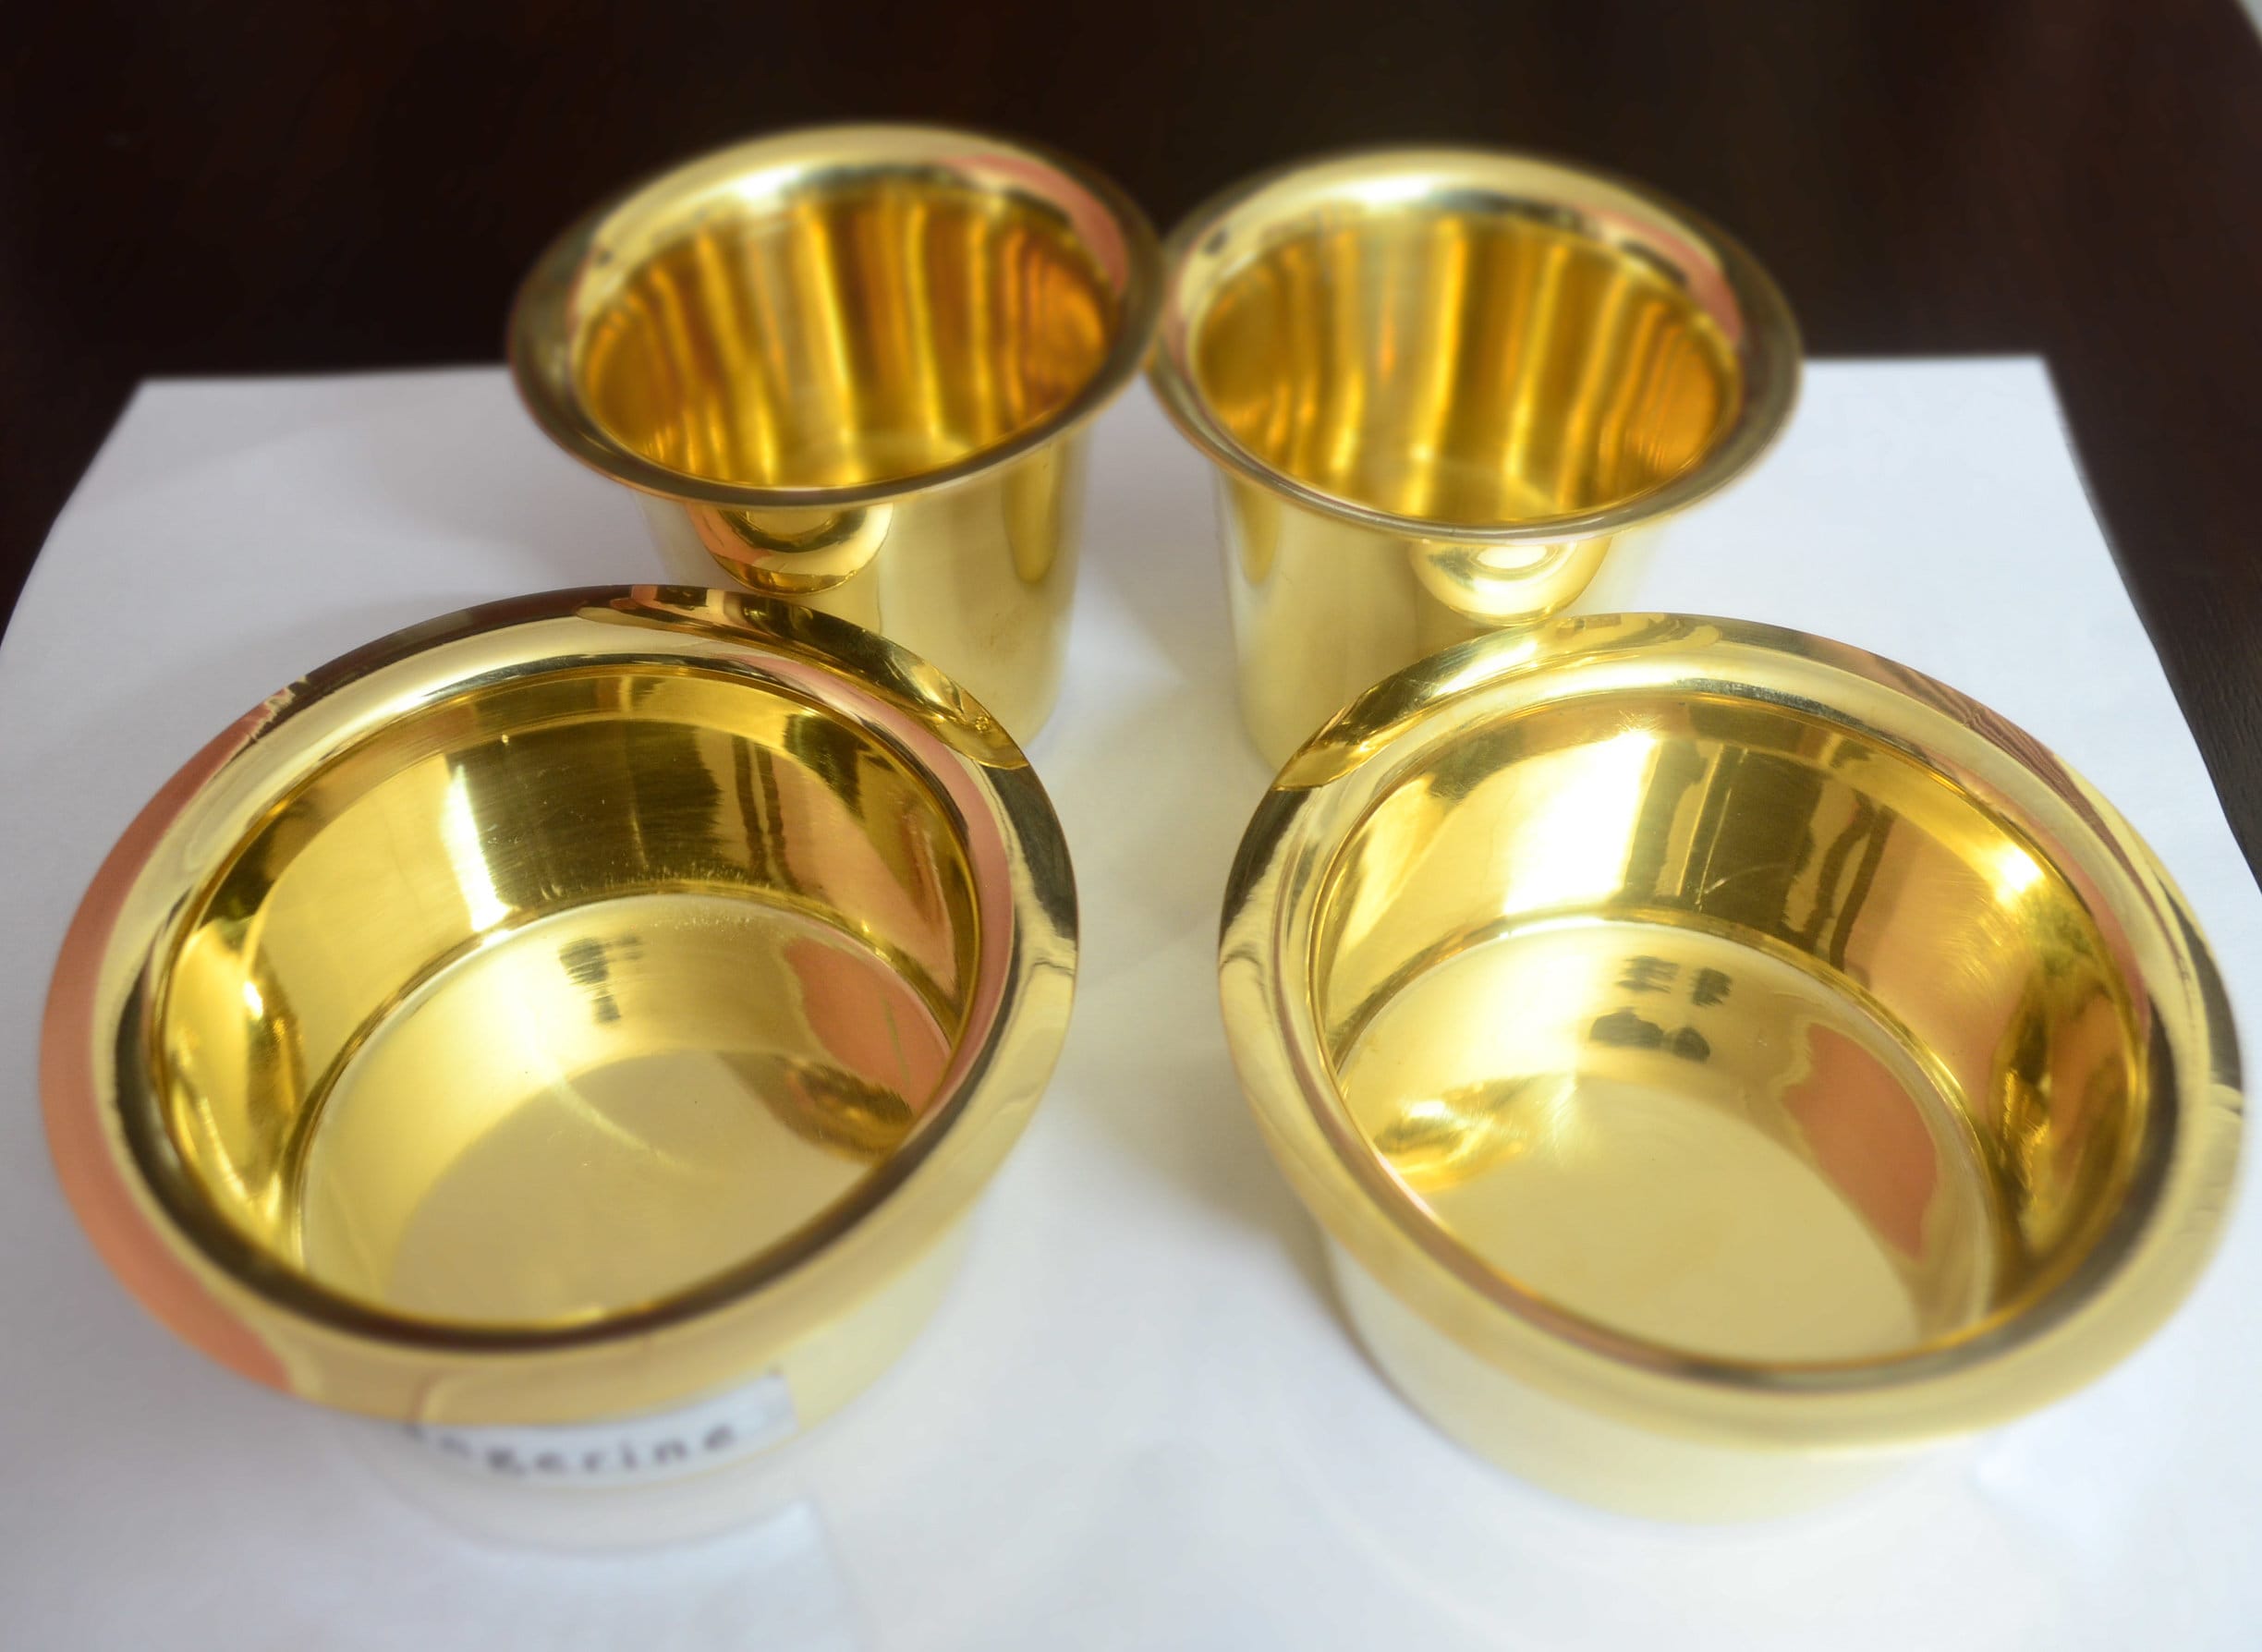 Indian Coffee Brass Tumbler Cup Set 150 ML Pure Brass Kappi Set of 3 Piece